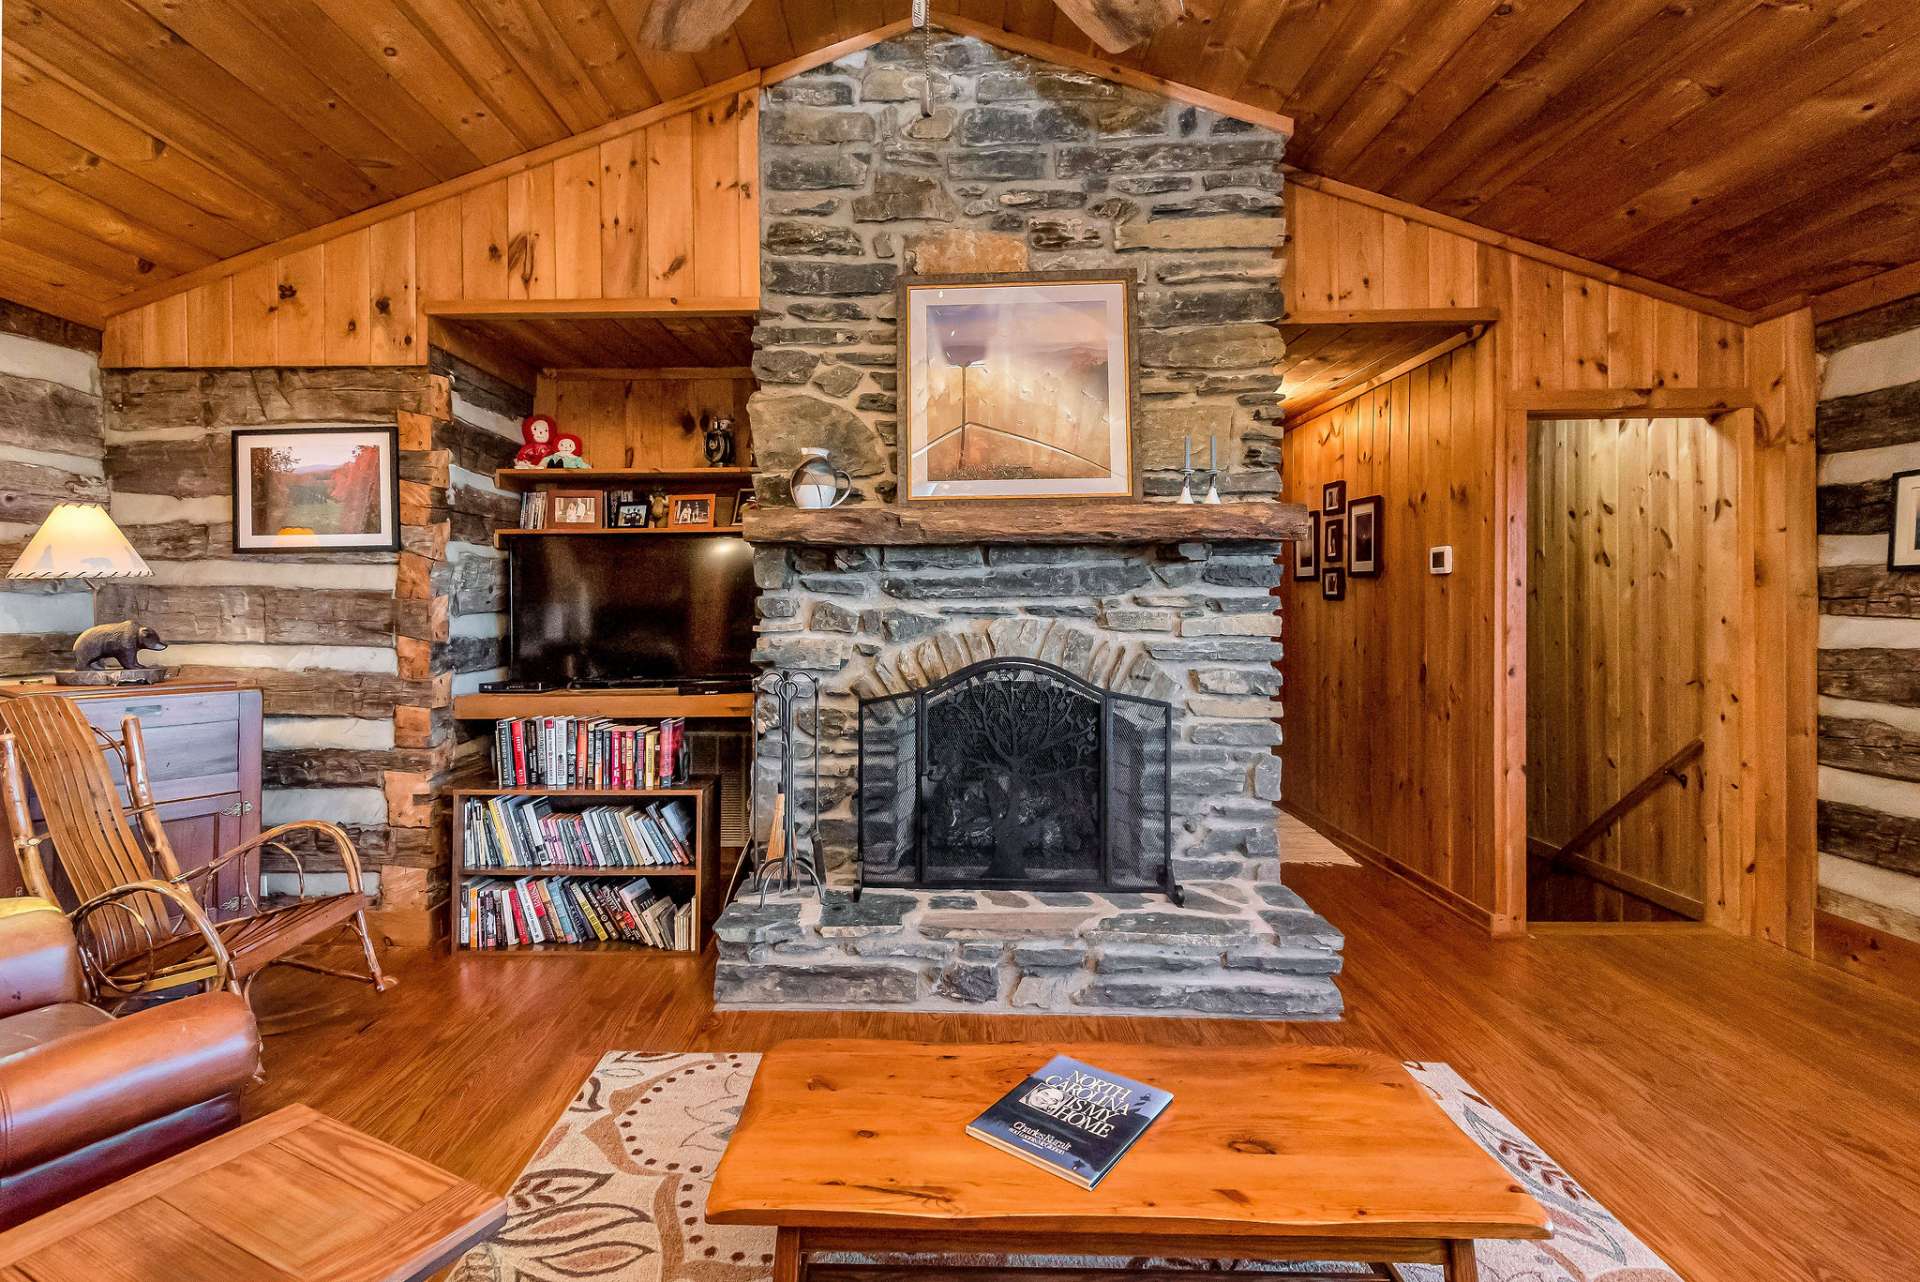 as logs offer warmth and ambiance.